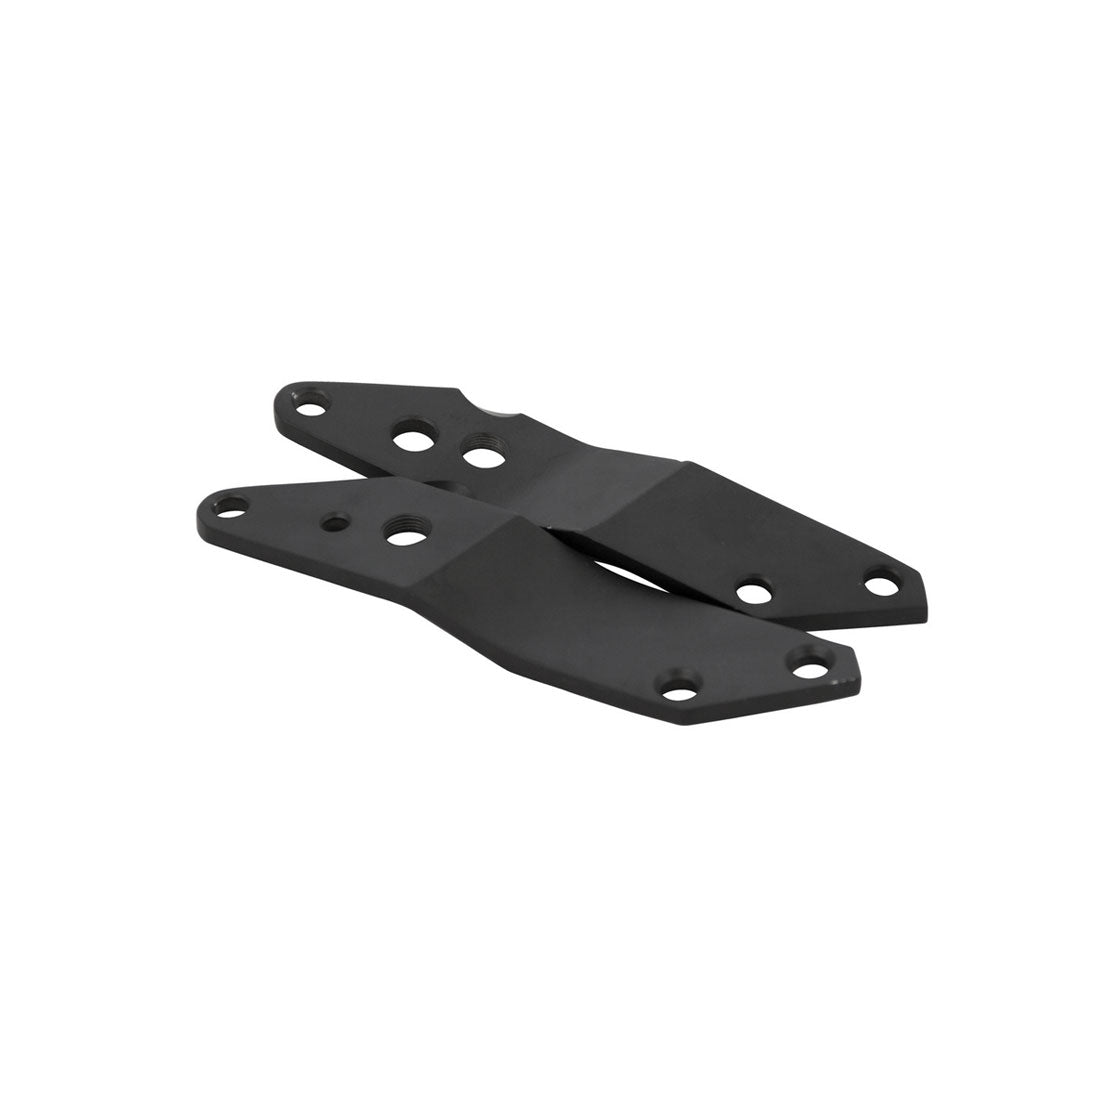 Micro Sprite Holder Plates L&R Black - 1368 Scooter Hardware and Parts